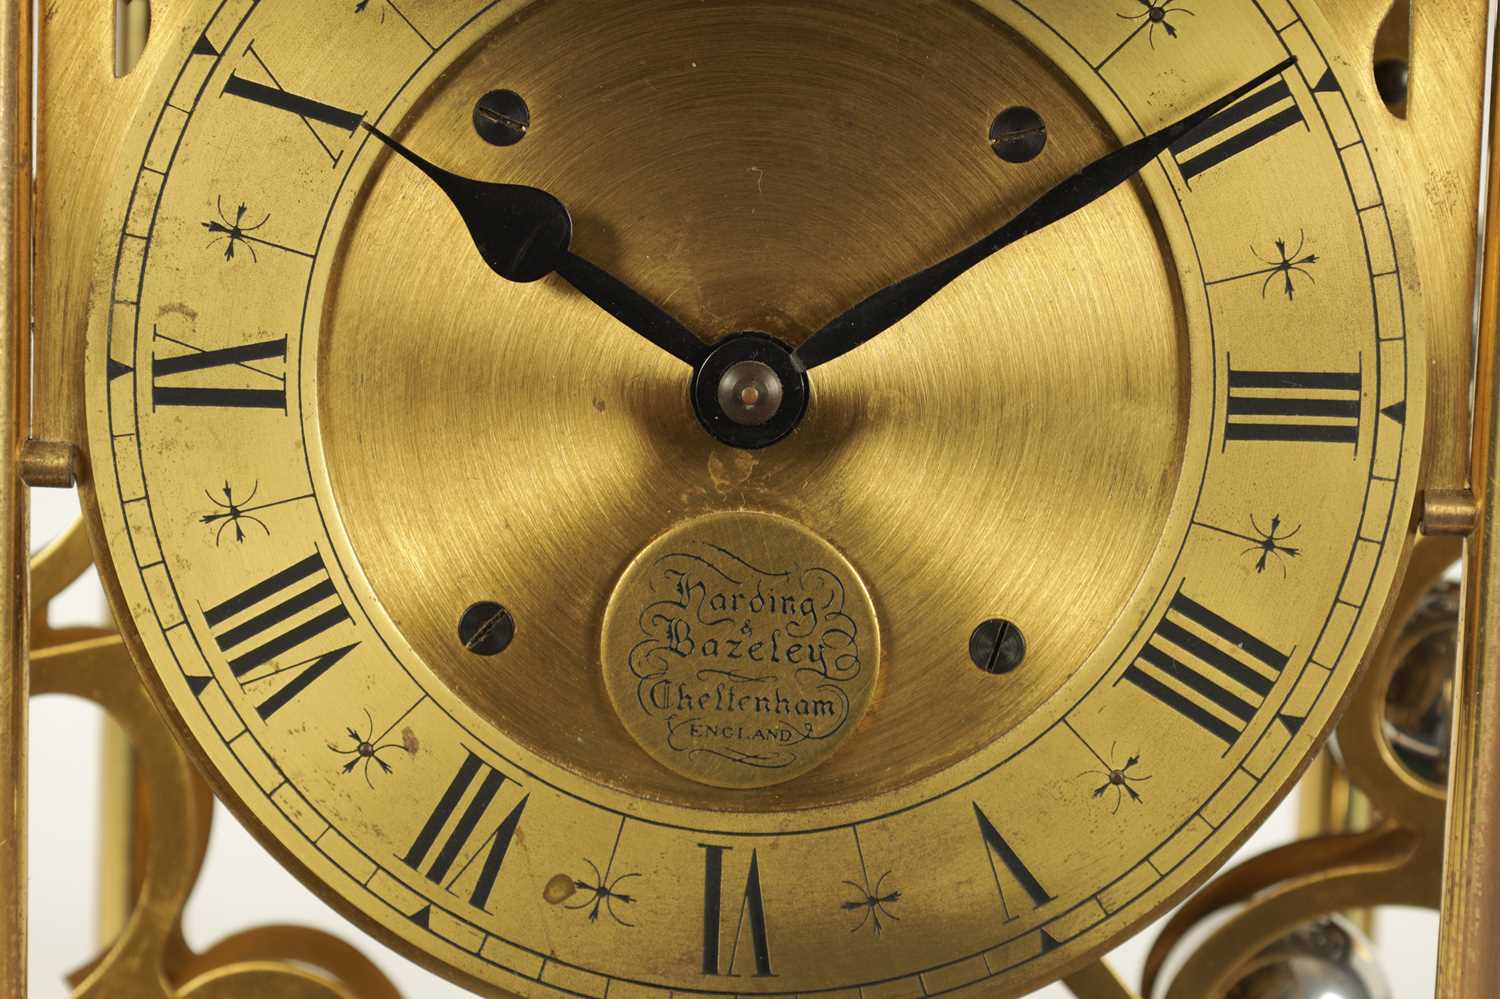 HARDING & BAZELEY, CHELTENHAM. A 20TH CENTURY LIMITED EDITION SPHERICAL BALL CLOCK - Image 3 of 14